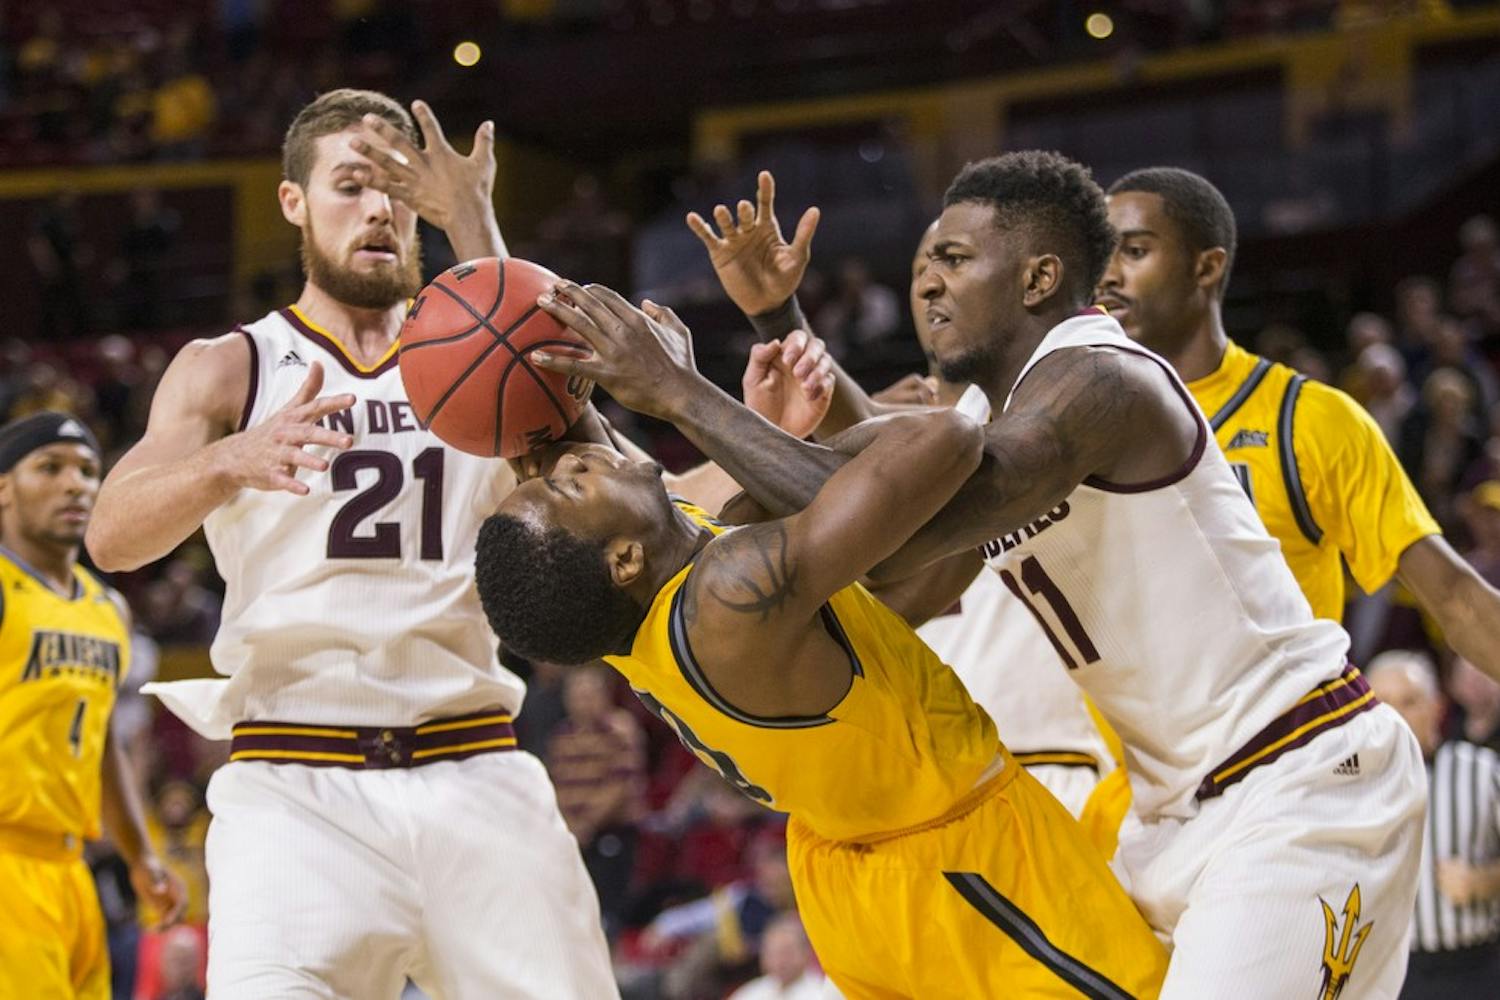 Junior forward Savon Goodman, right, fights for control of the ball in a game against Kennesaw State on Wednesday, Nov. 18, 2015, at Wells Fargo Arena in Tempe. The Sun Devils took down the Owls 91-53.